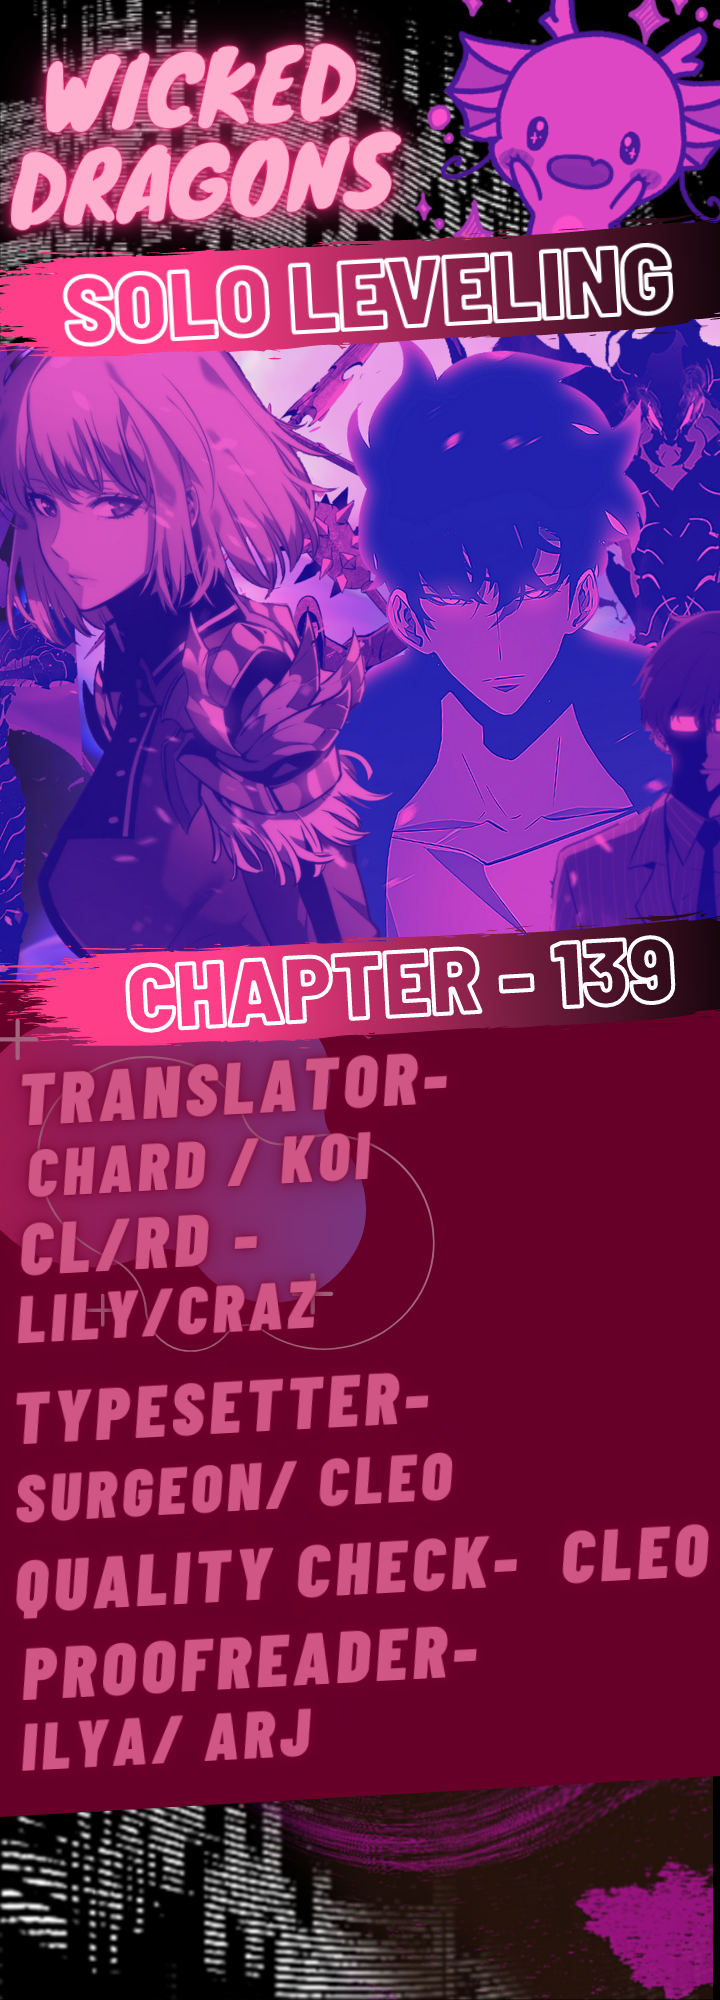 Solo Leveling - Chapter 2901 - Image 1